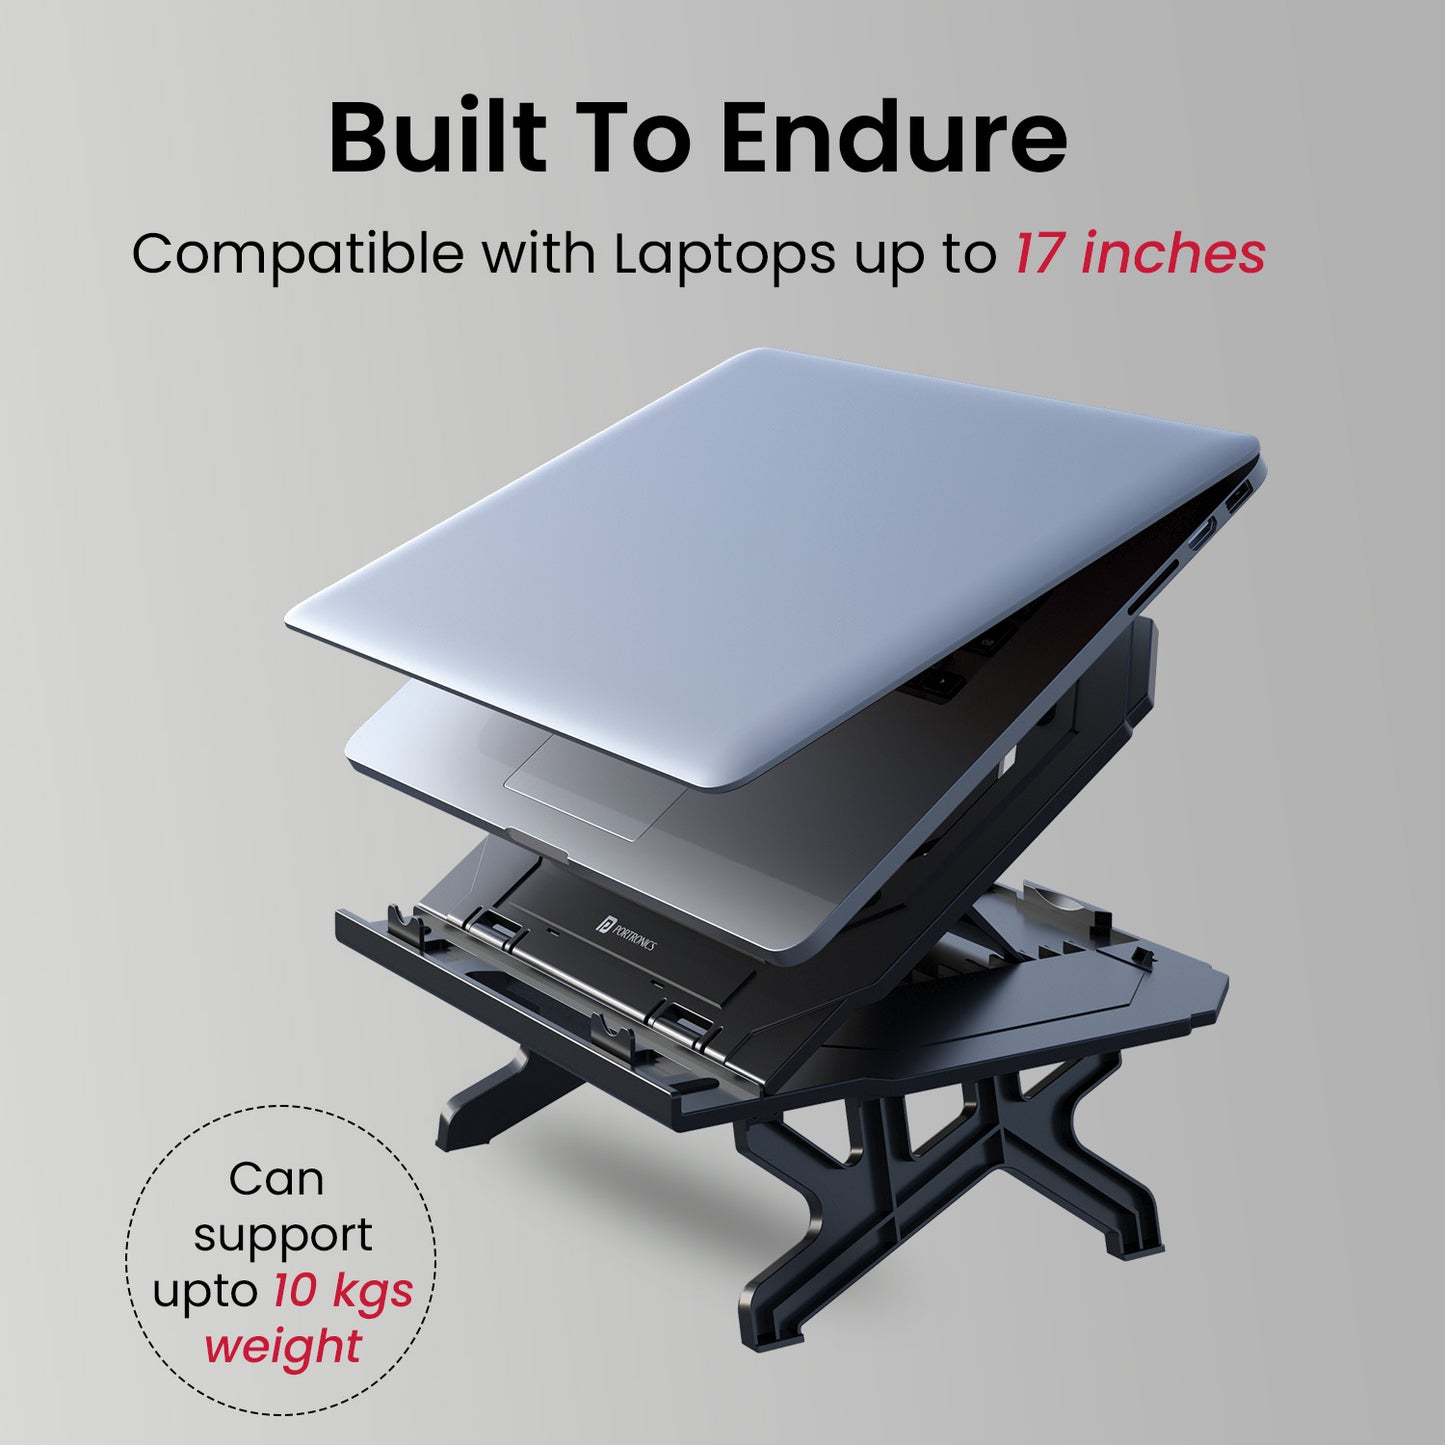 Blue Portronics My Buddy Hexa 33: Laptop Stand compatible with laptop upto 17inches